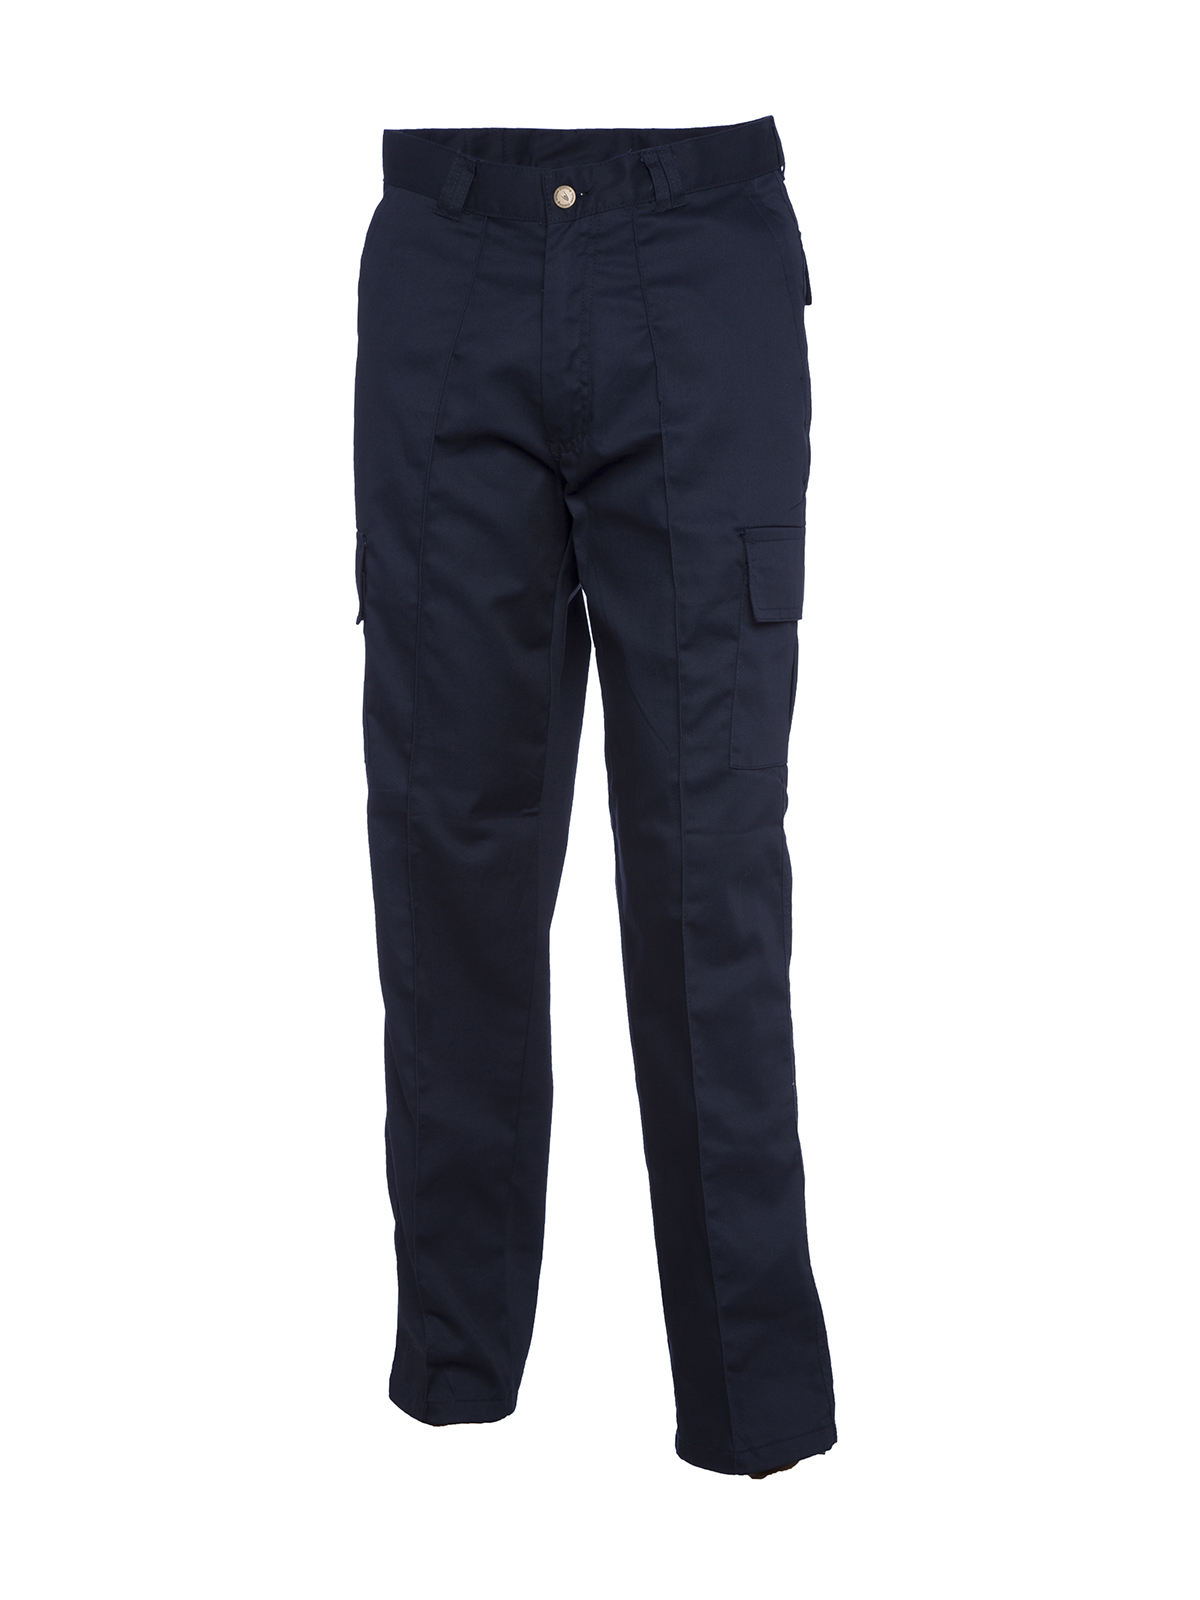 Cargo Trousers, Navy Blue - 36S